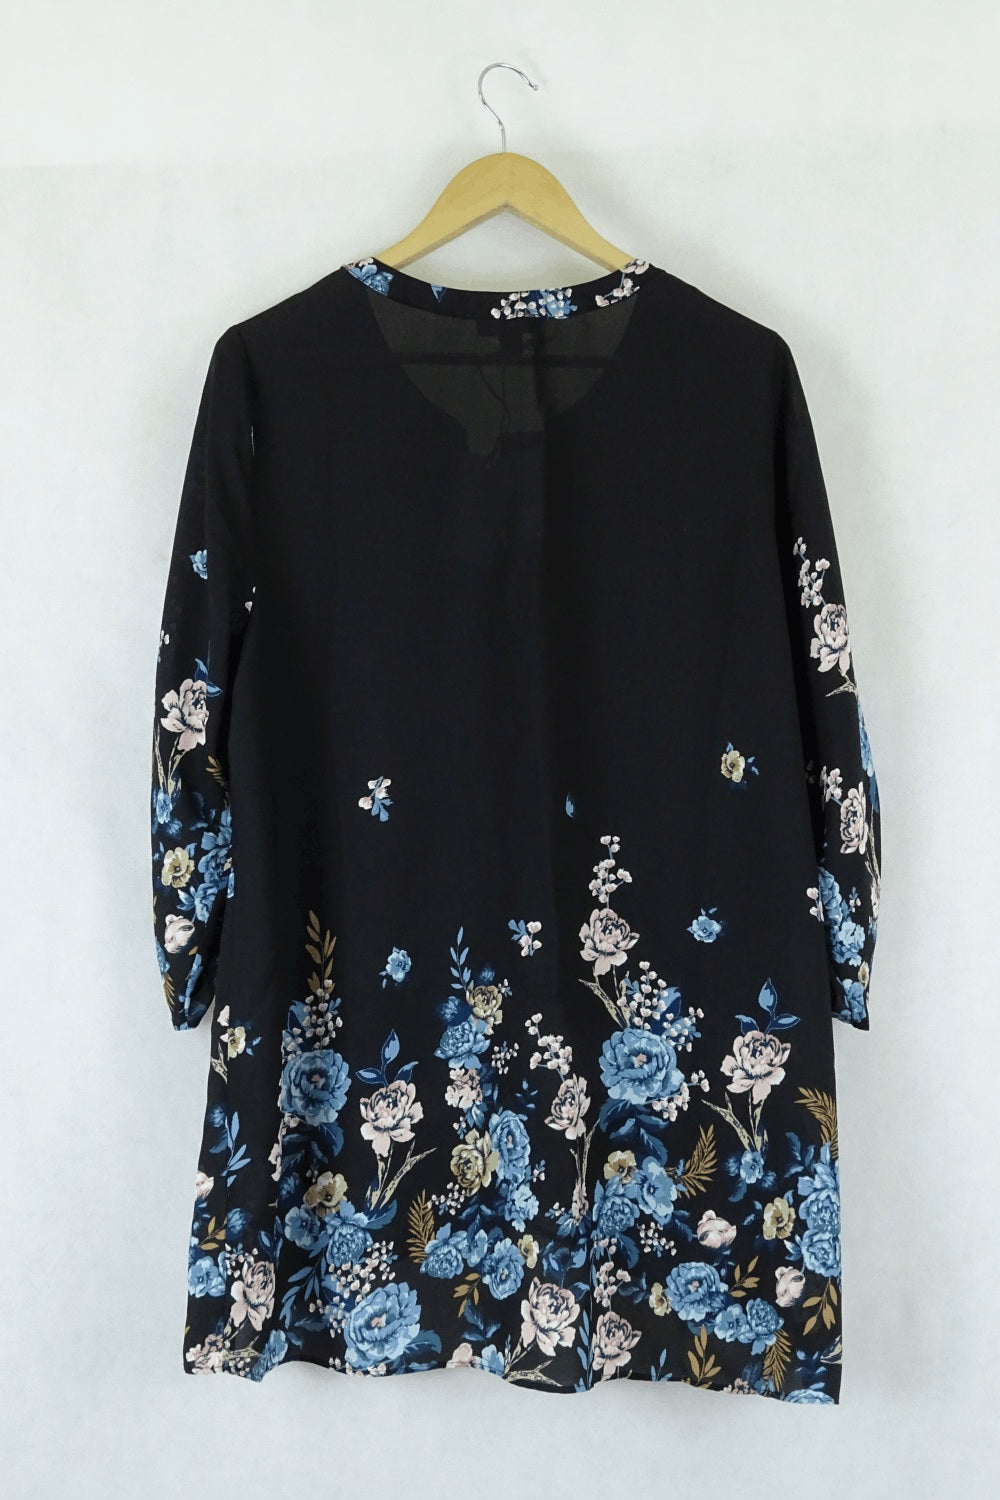 Autograph Floral and Black 'Bluebell' Blouse 14